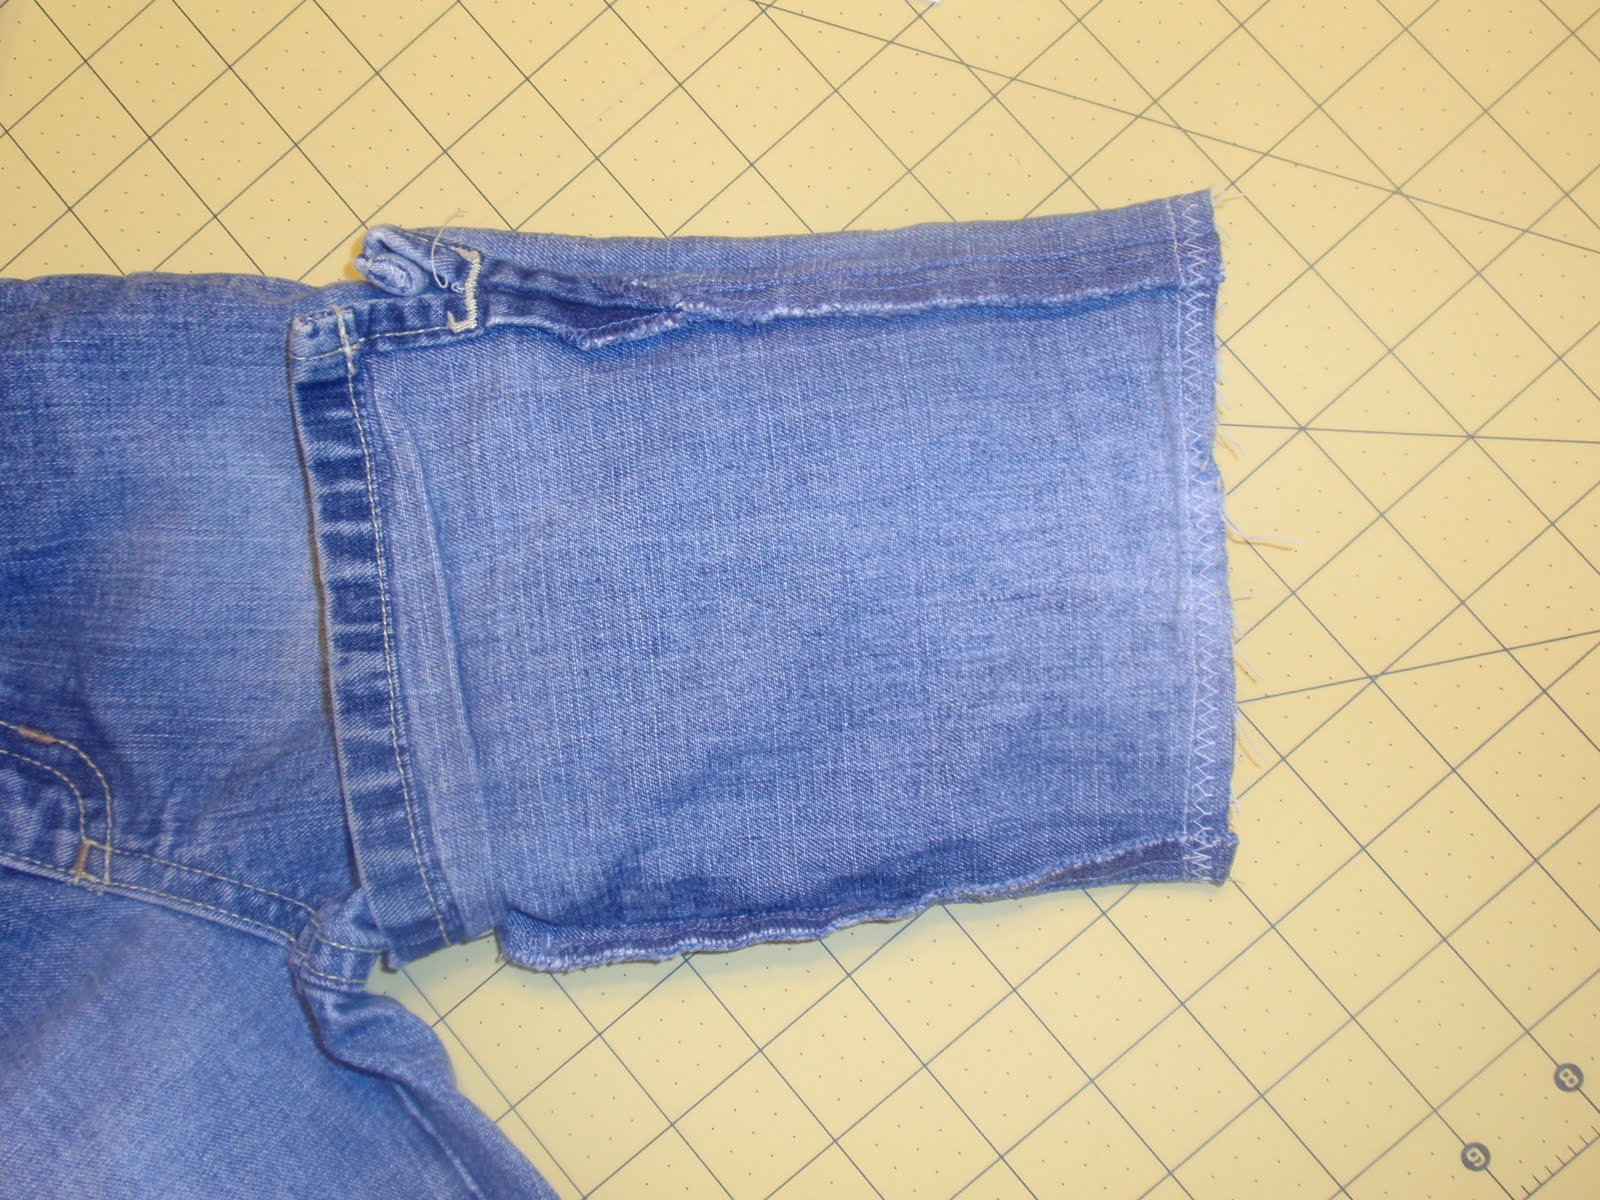 Diary of a Crafty Lady: Patching up some Holey Jeans